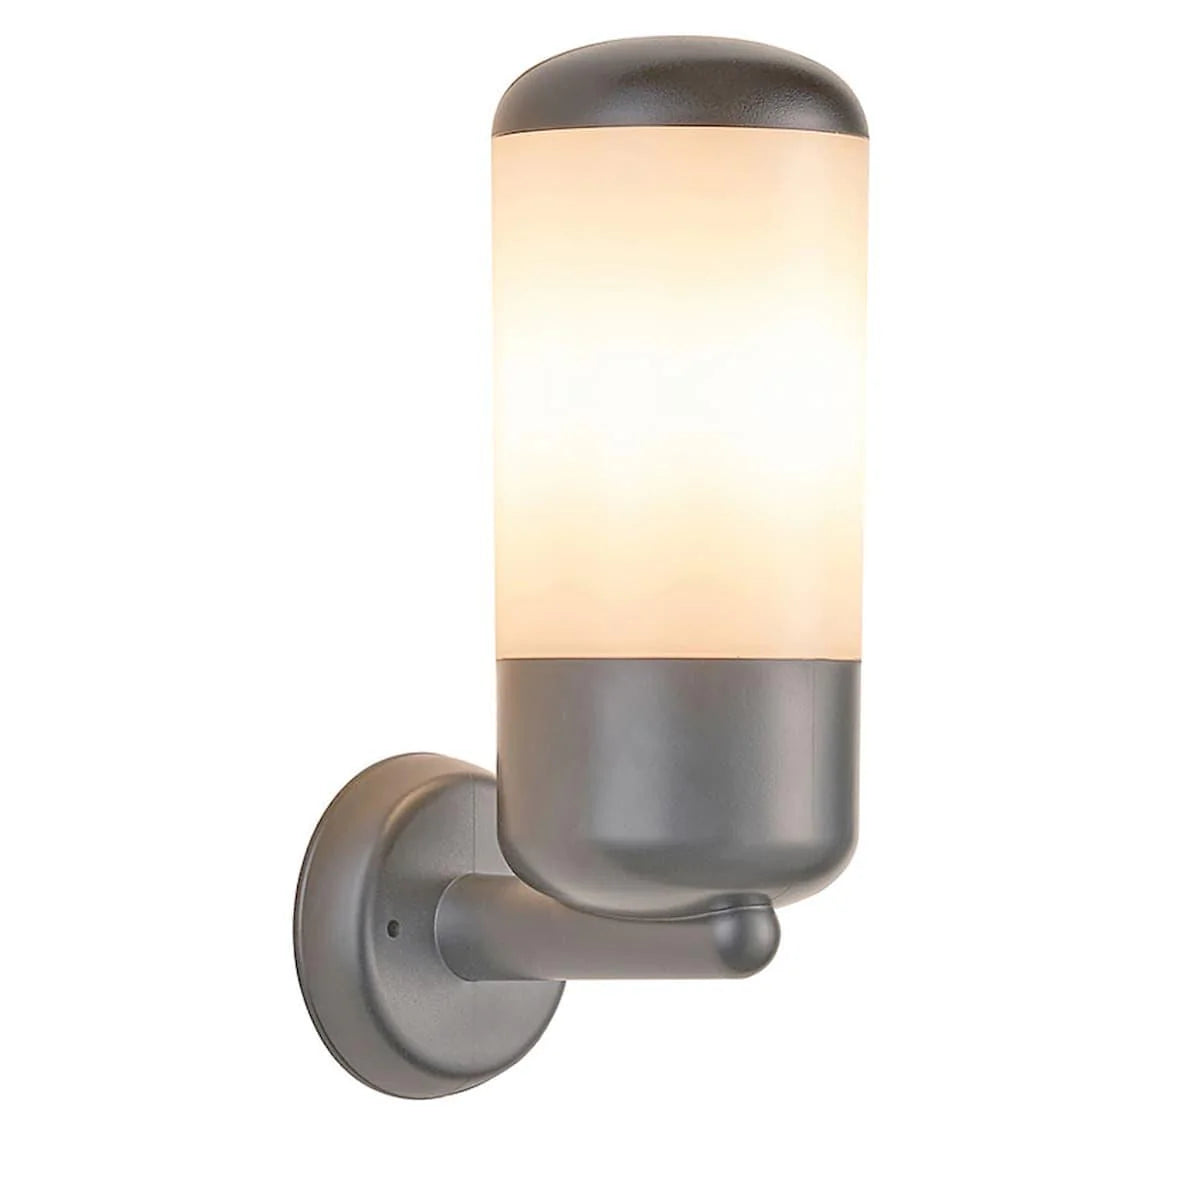 POLYCARBONATE CORROSION PROOF OUTDOOR WALL LIGHT – GREY FINISH |EL7001W/GRY - Peter Murphy Lighting & Electrical Ltd